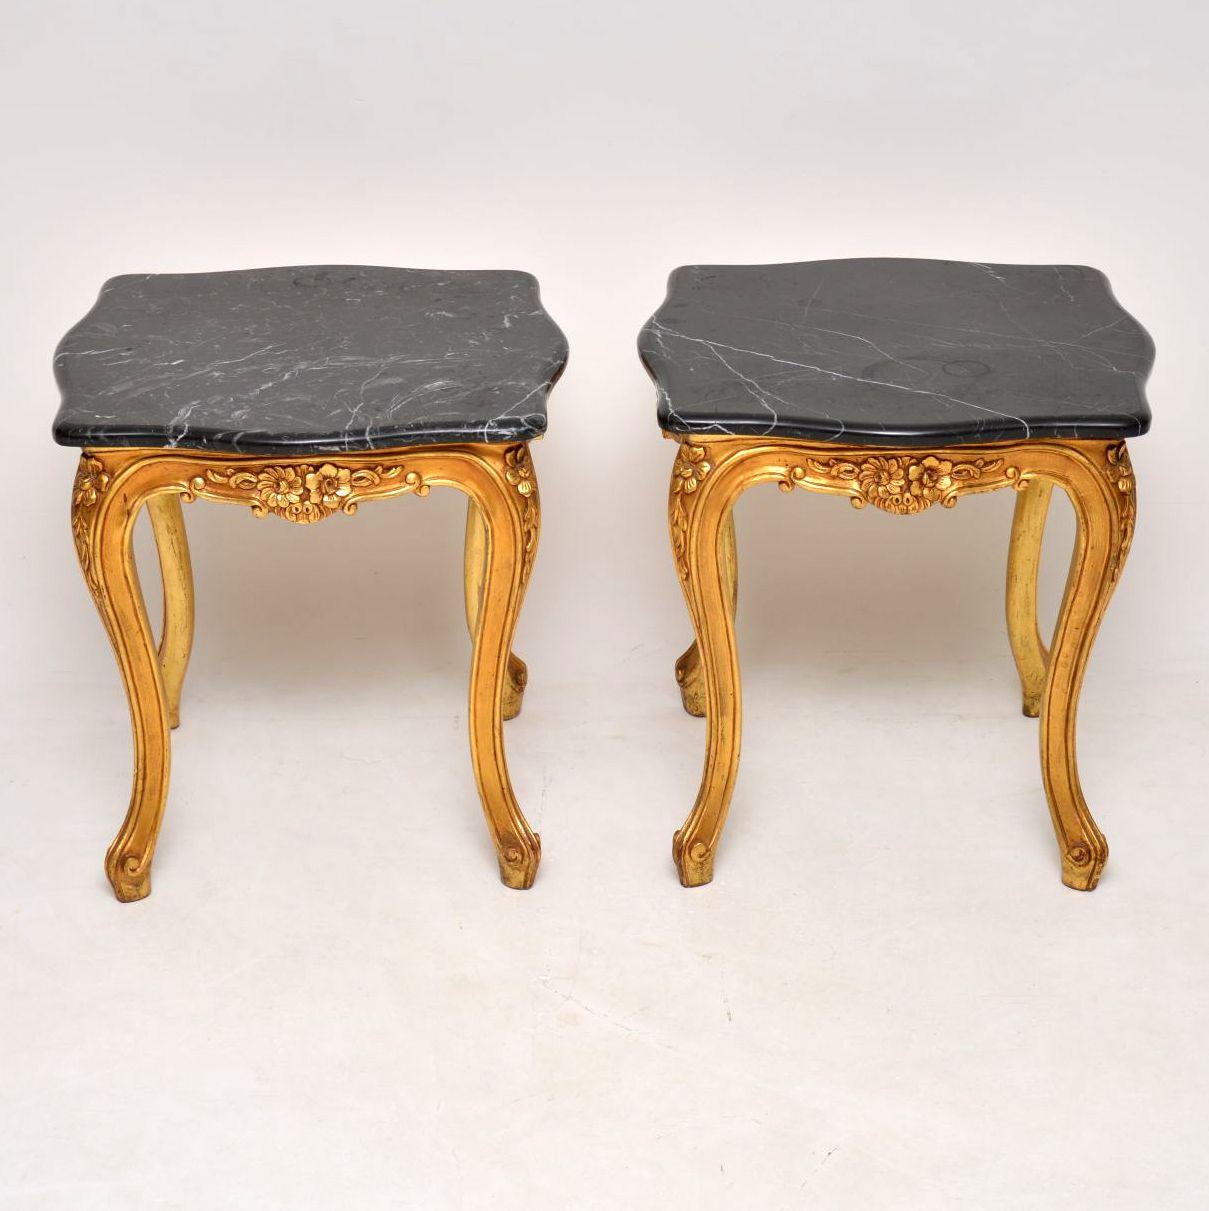 Pair of antique French style giltwood marble-top side tables in good condition and dating from around the 1950s period. The gilt frames are fine quality and well carved. The marble tops are in good condition too, with a few minor scuff marks on the